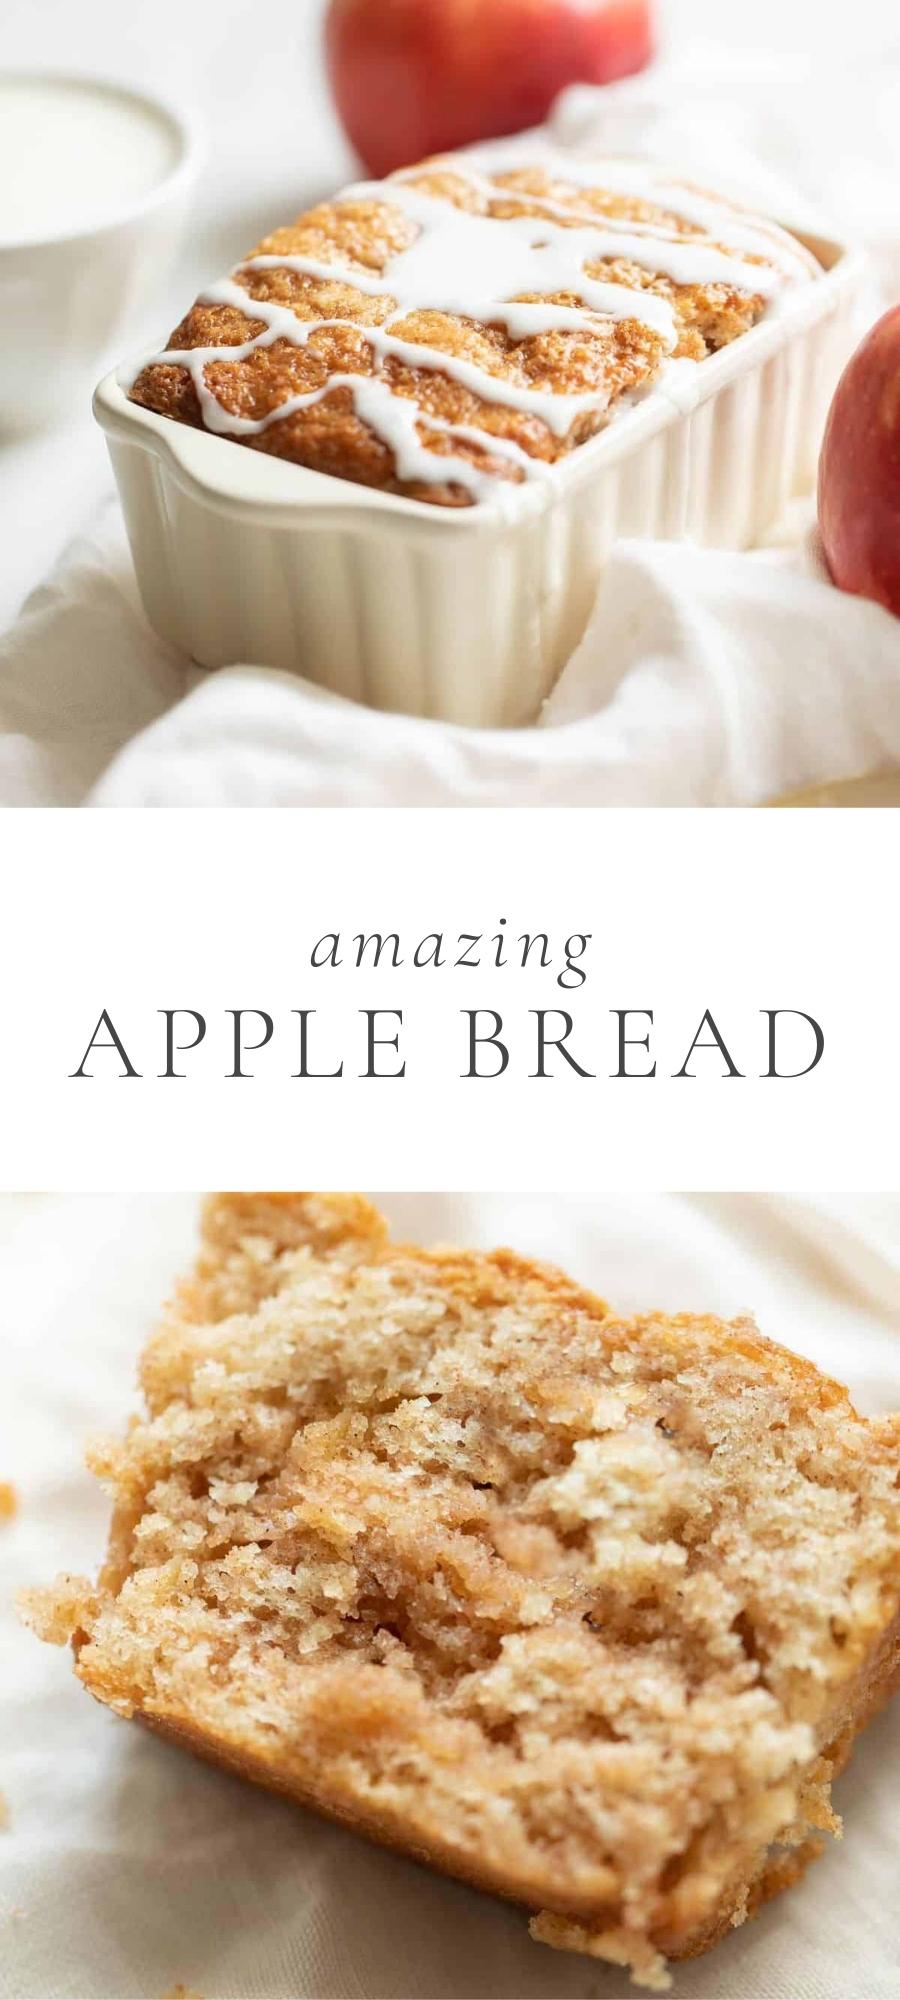 apple bread with red apples